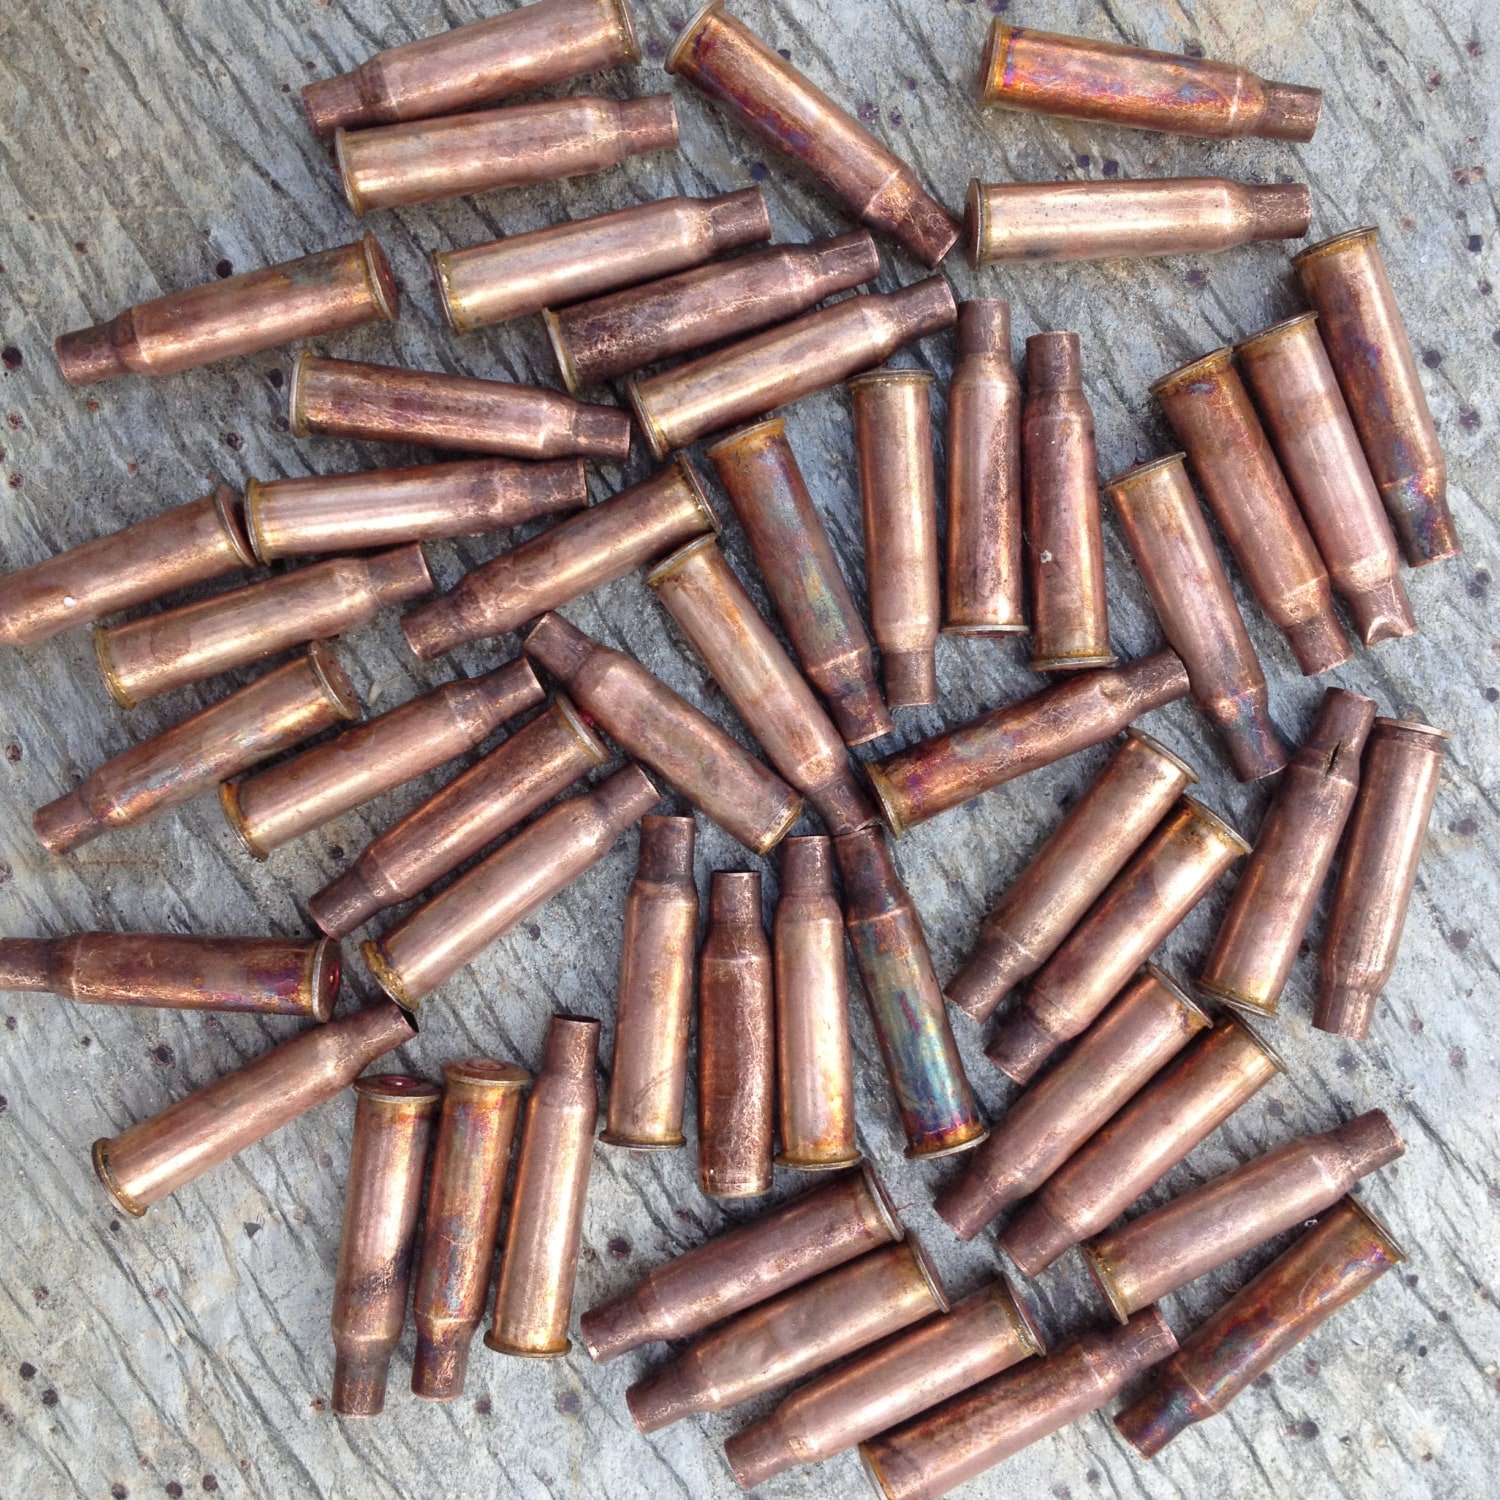 50pc Empty Bullet Casings for Steampunk Crafts